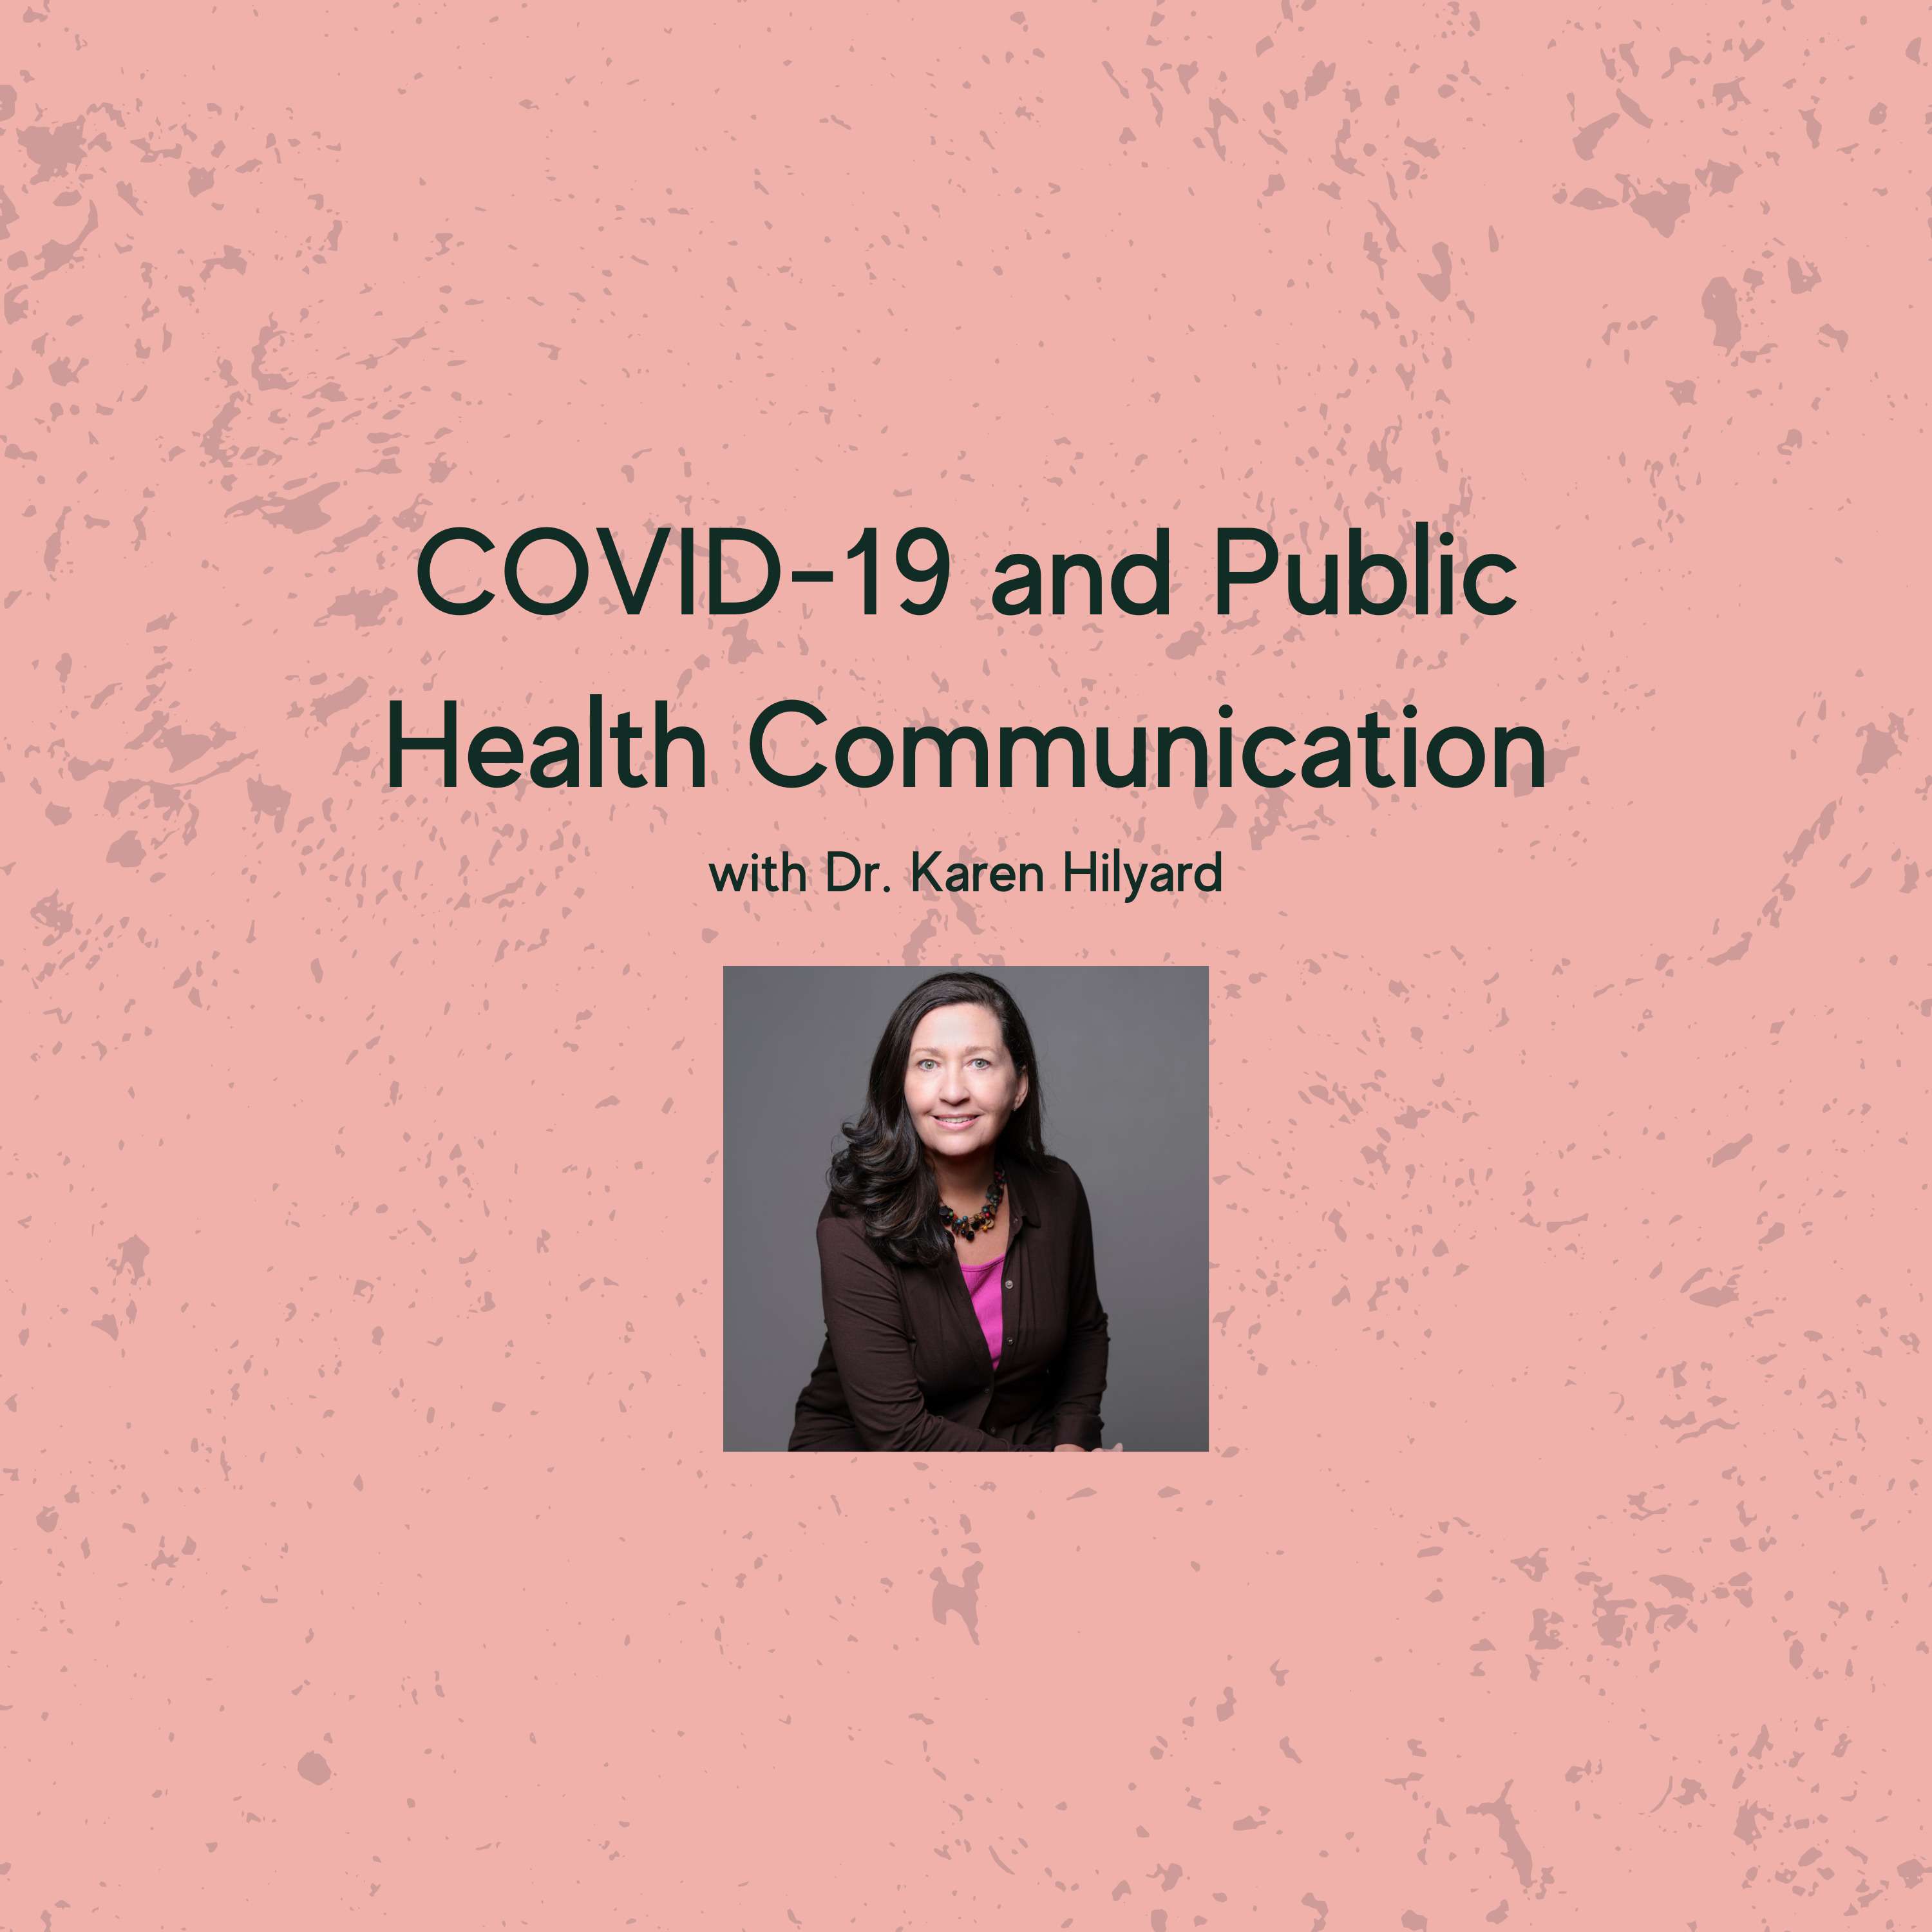 COVID-19 and Public Health Communication with Dr. Karen Hilyard